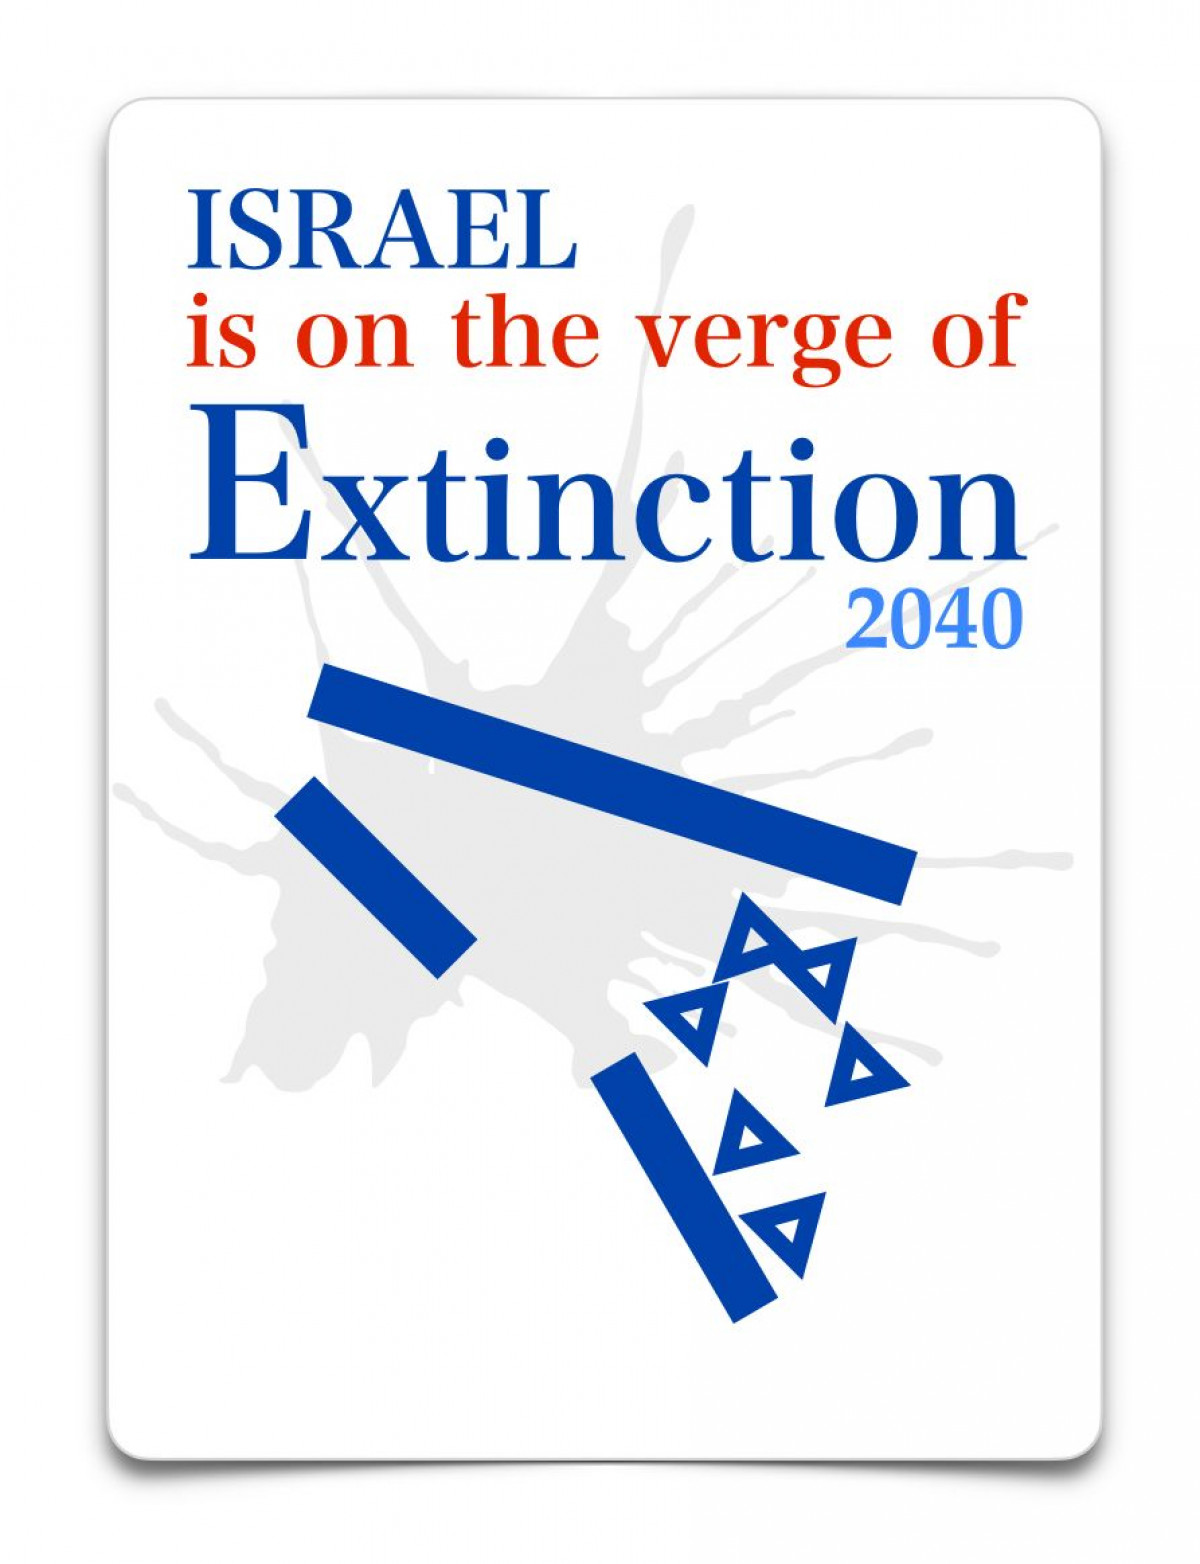 ISRAEL IS ON THE VERGE OF EXTINCTION 2040